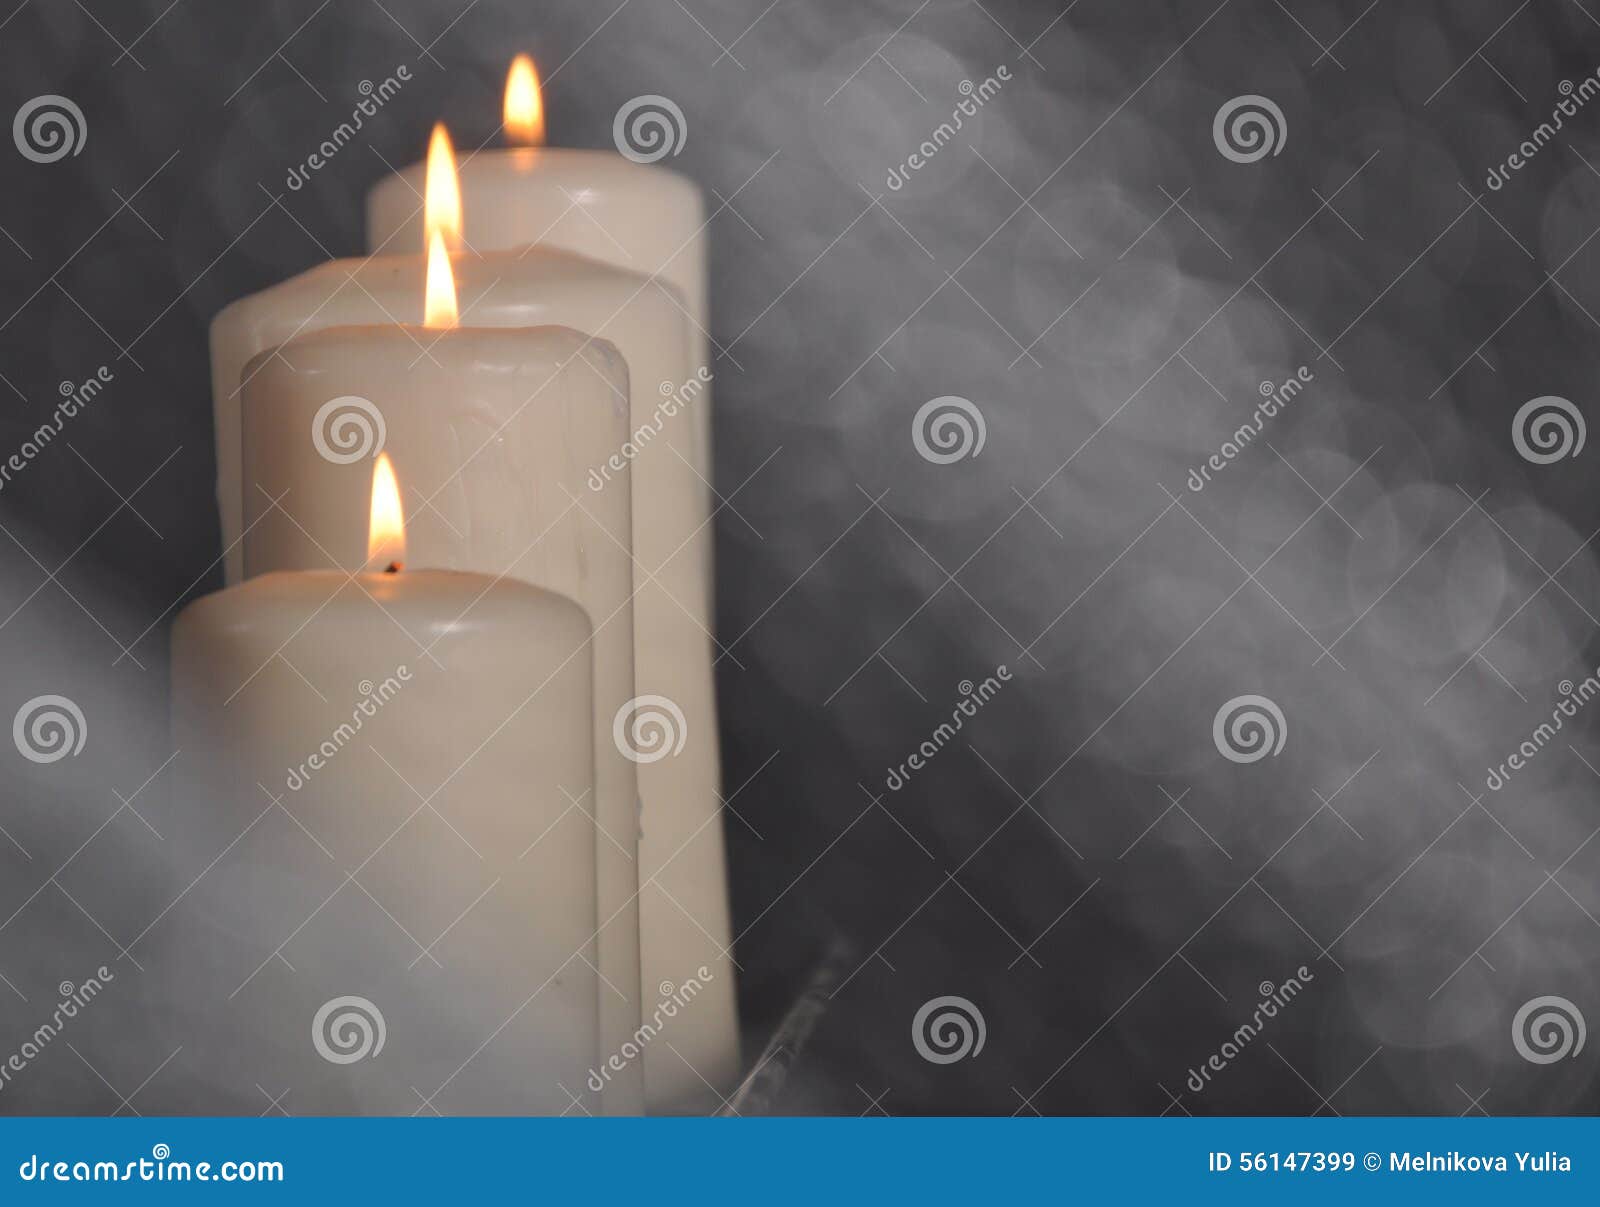 Candle stock image. Image of holy, candle, flame, dark - 56147399